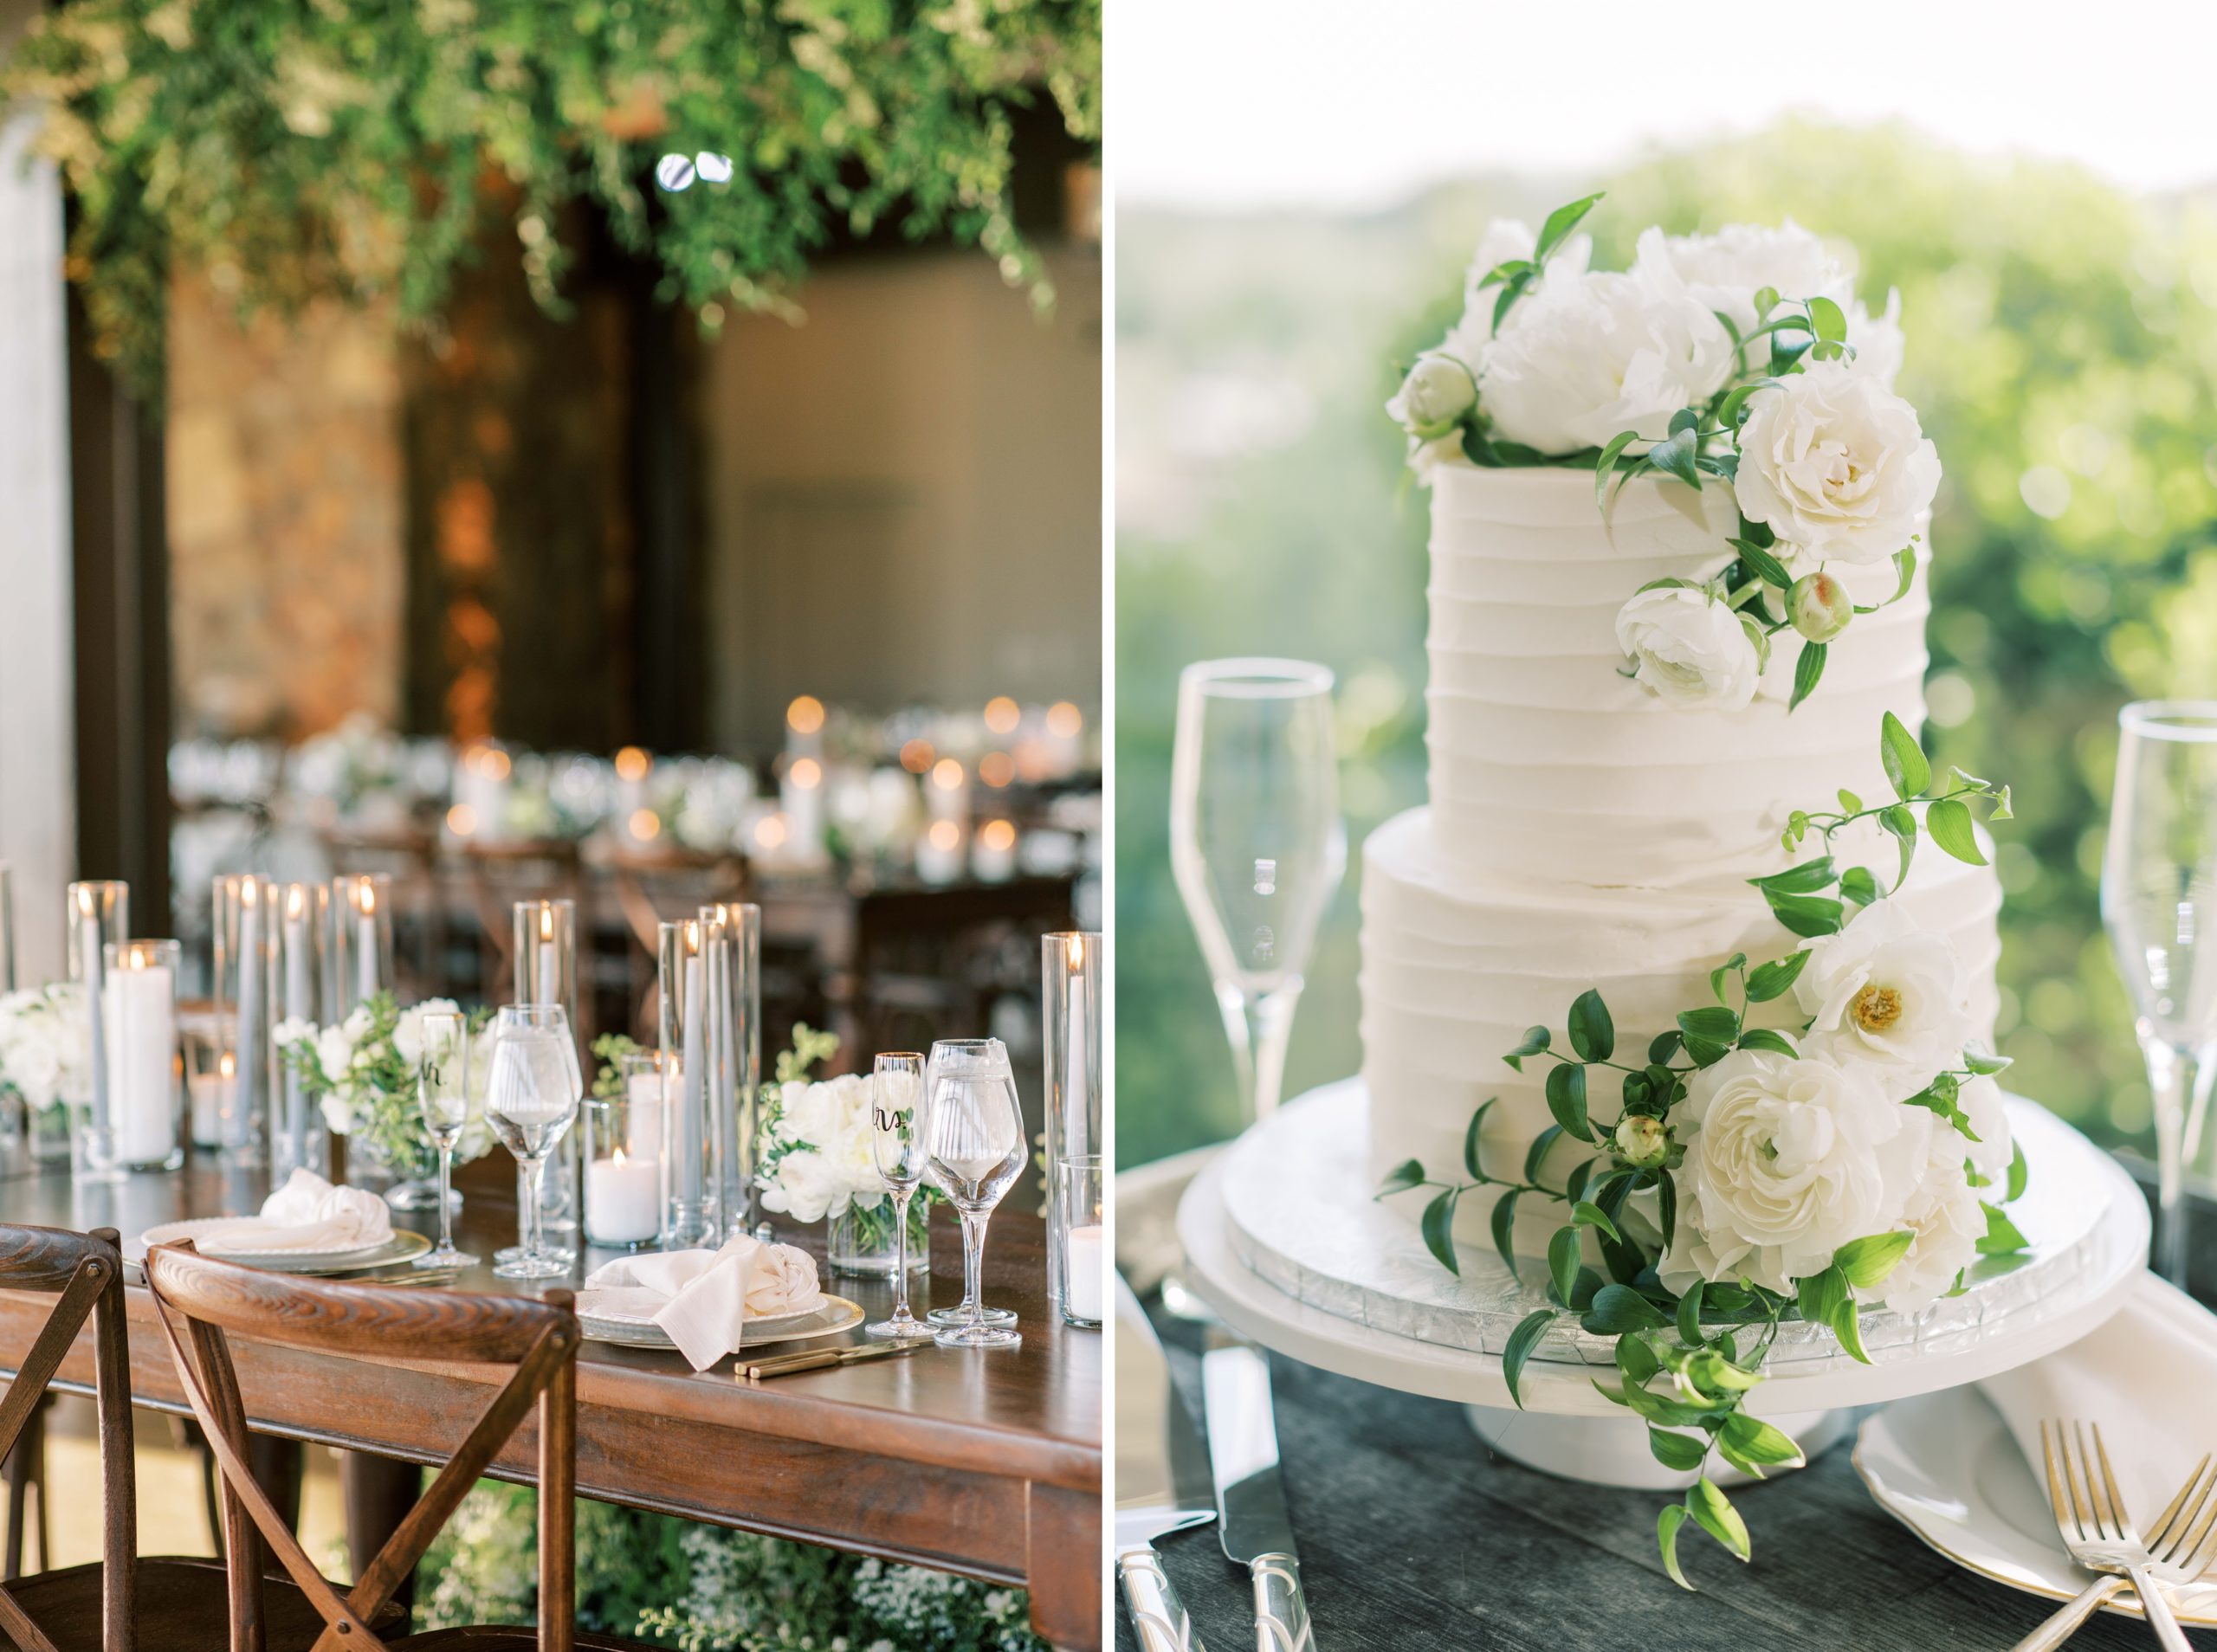 A beautiful spring wedding at Stone Tower Winery in Leesburg, VA is captured by DC film photographer, Alicia Lacey.